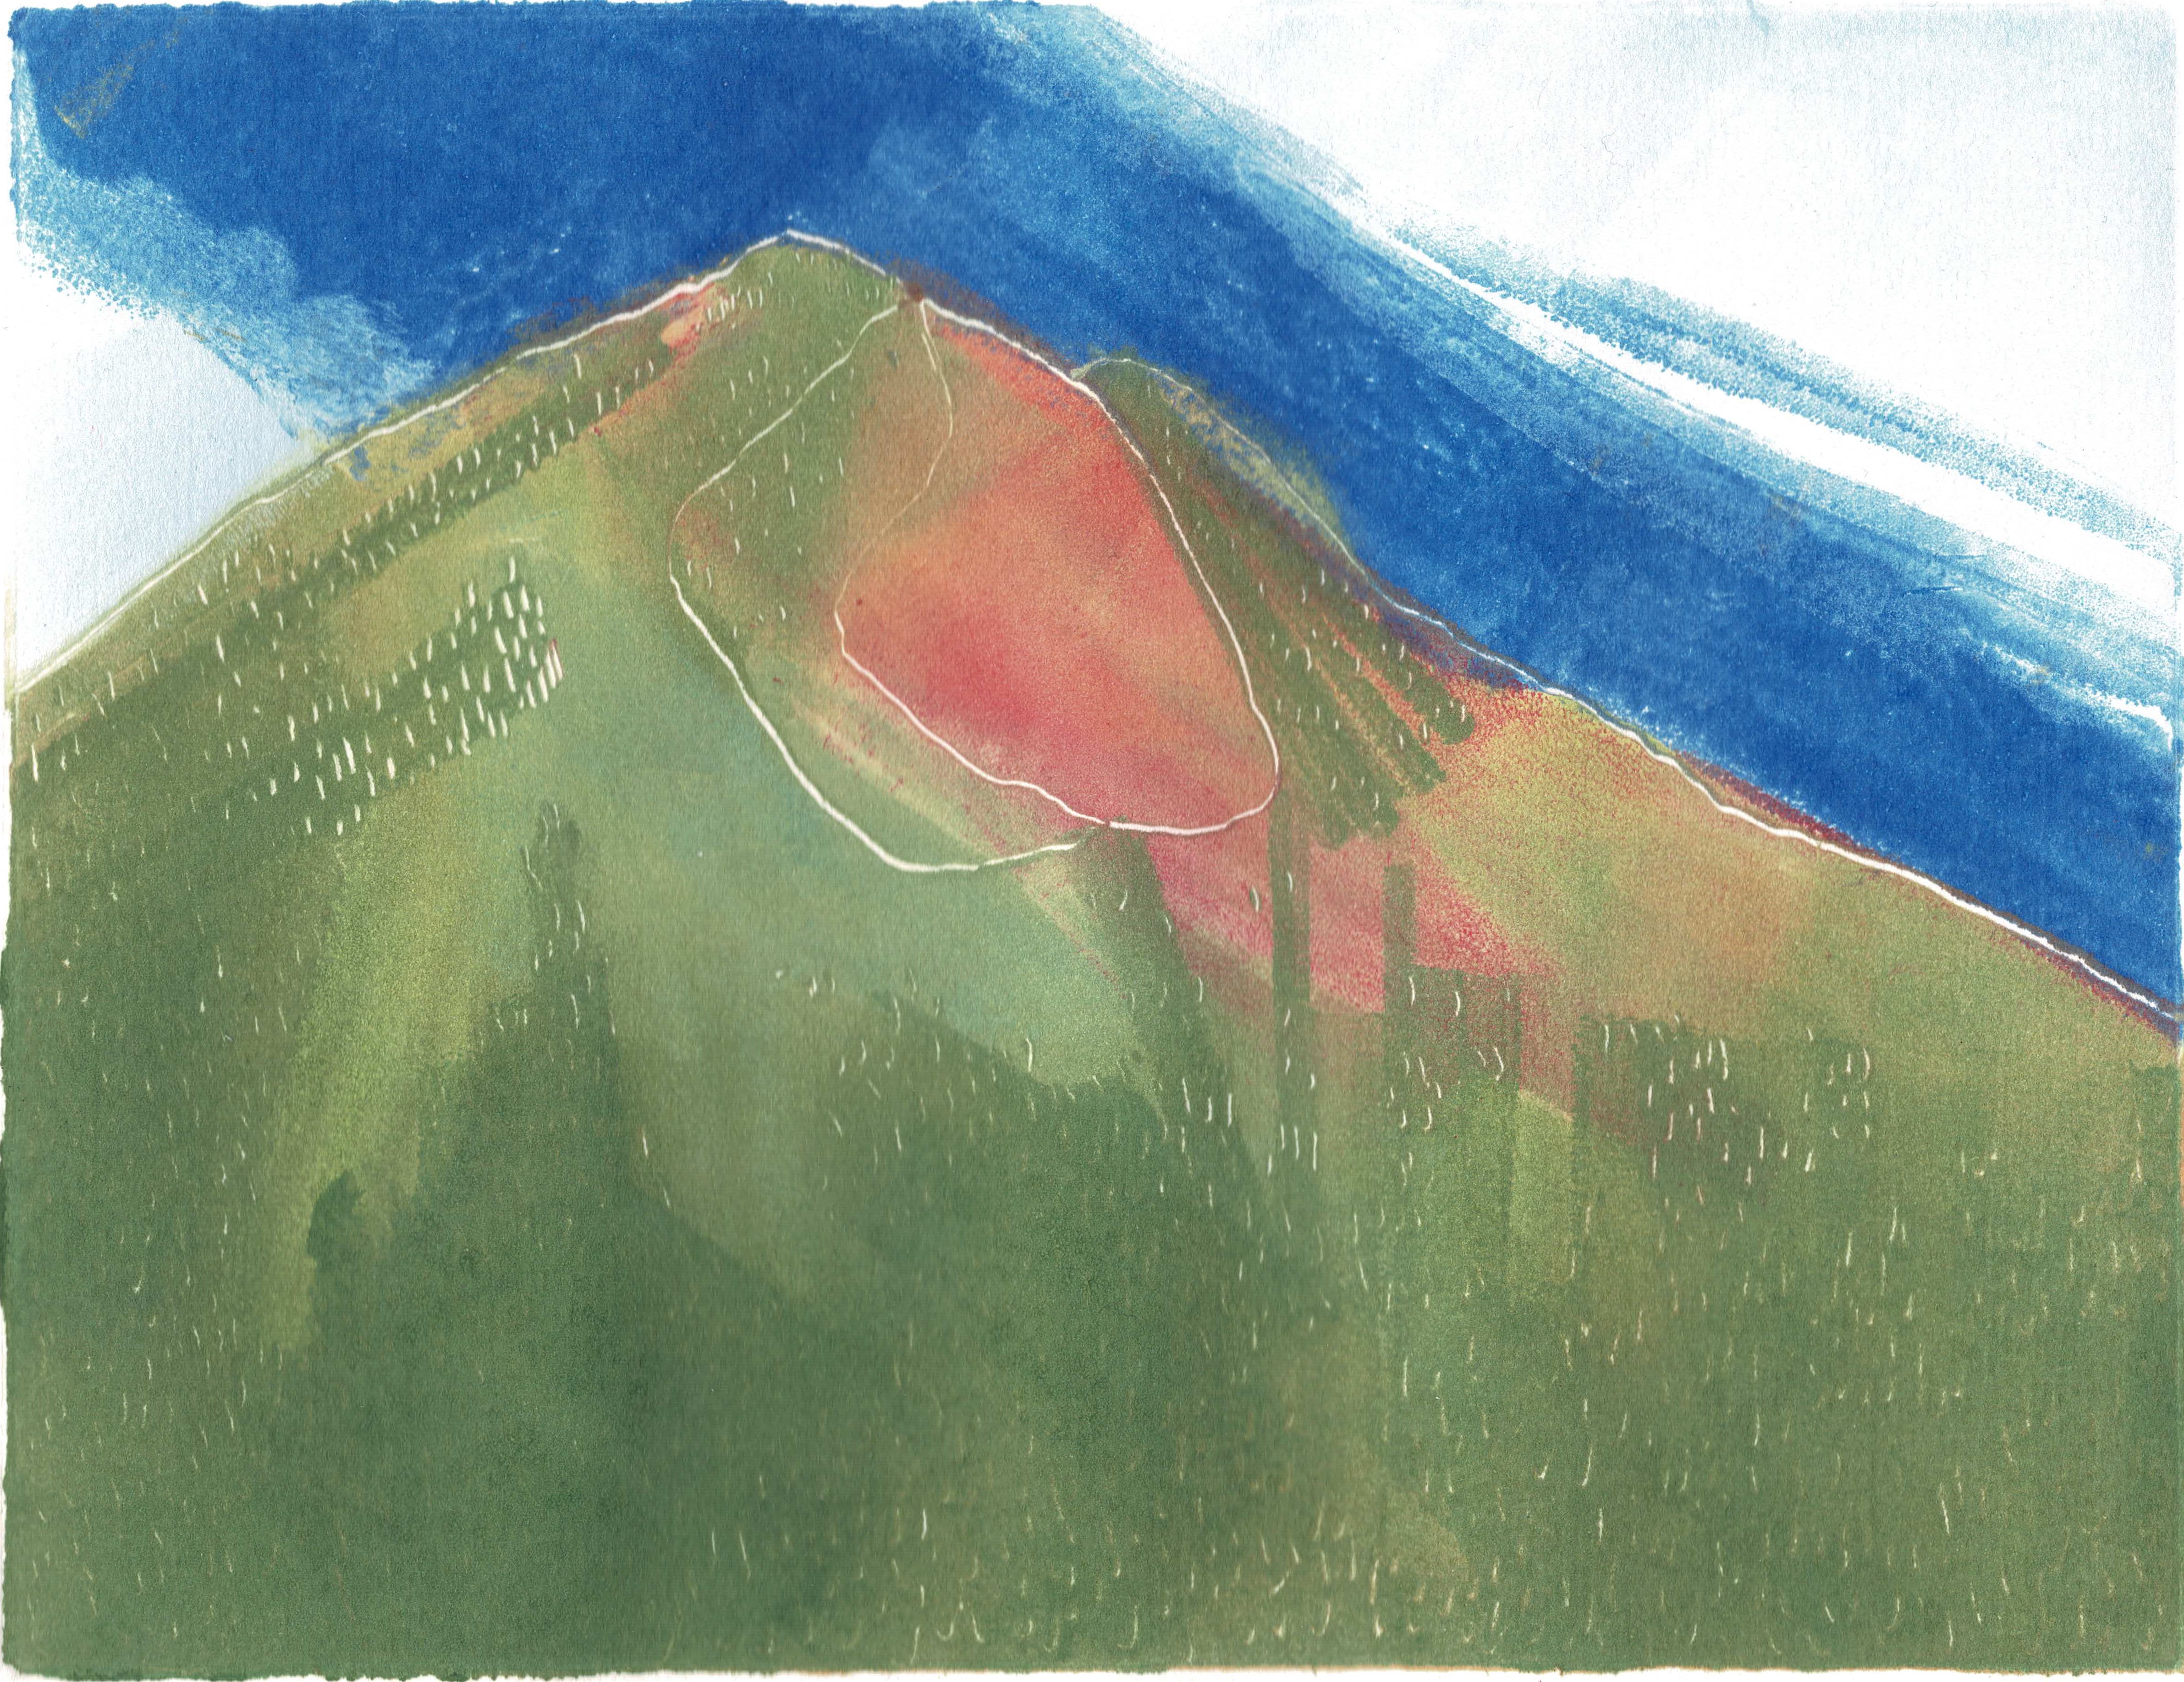 No Pressure gallery. Painting of a mountain